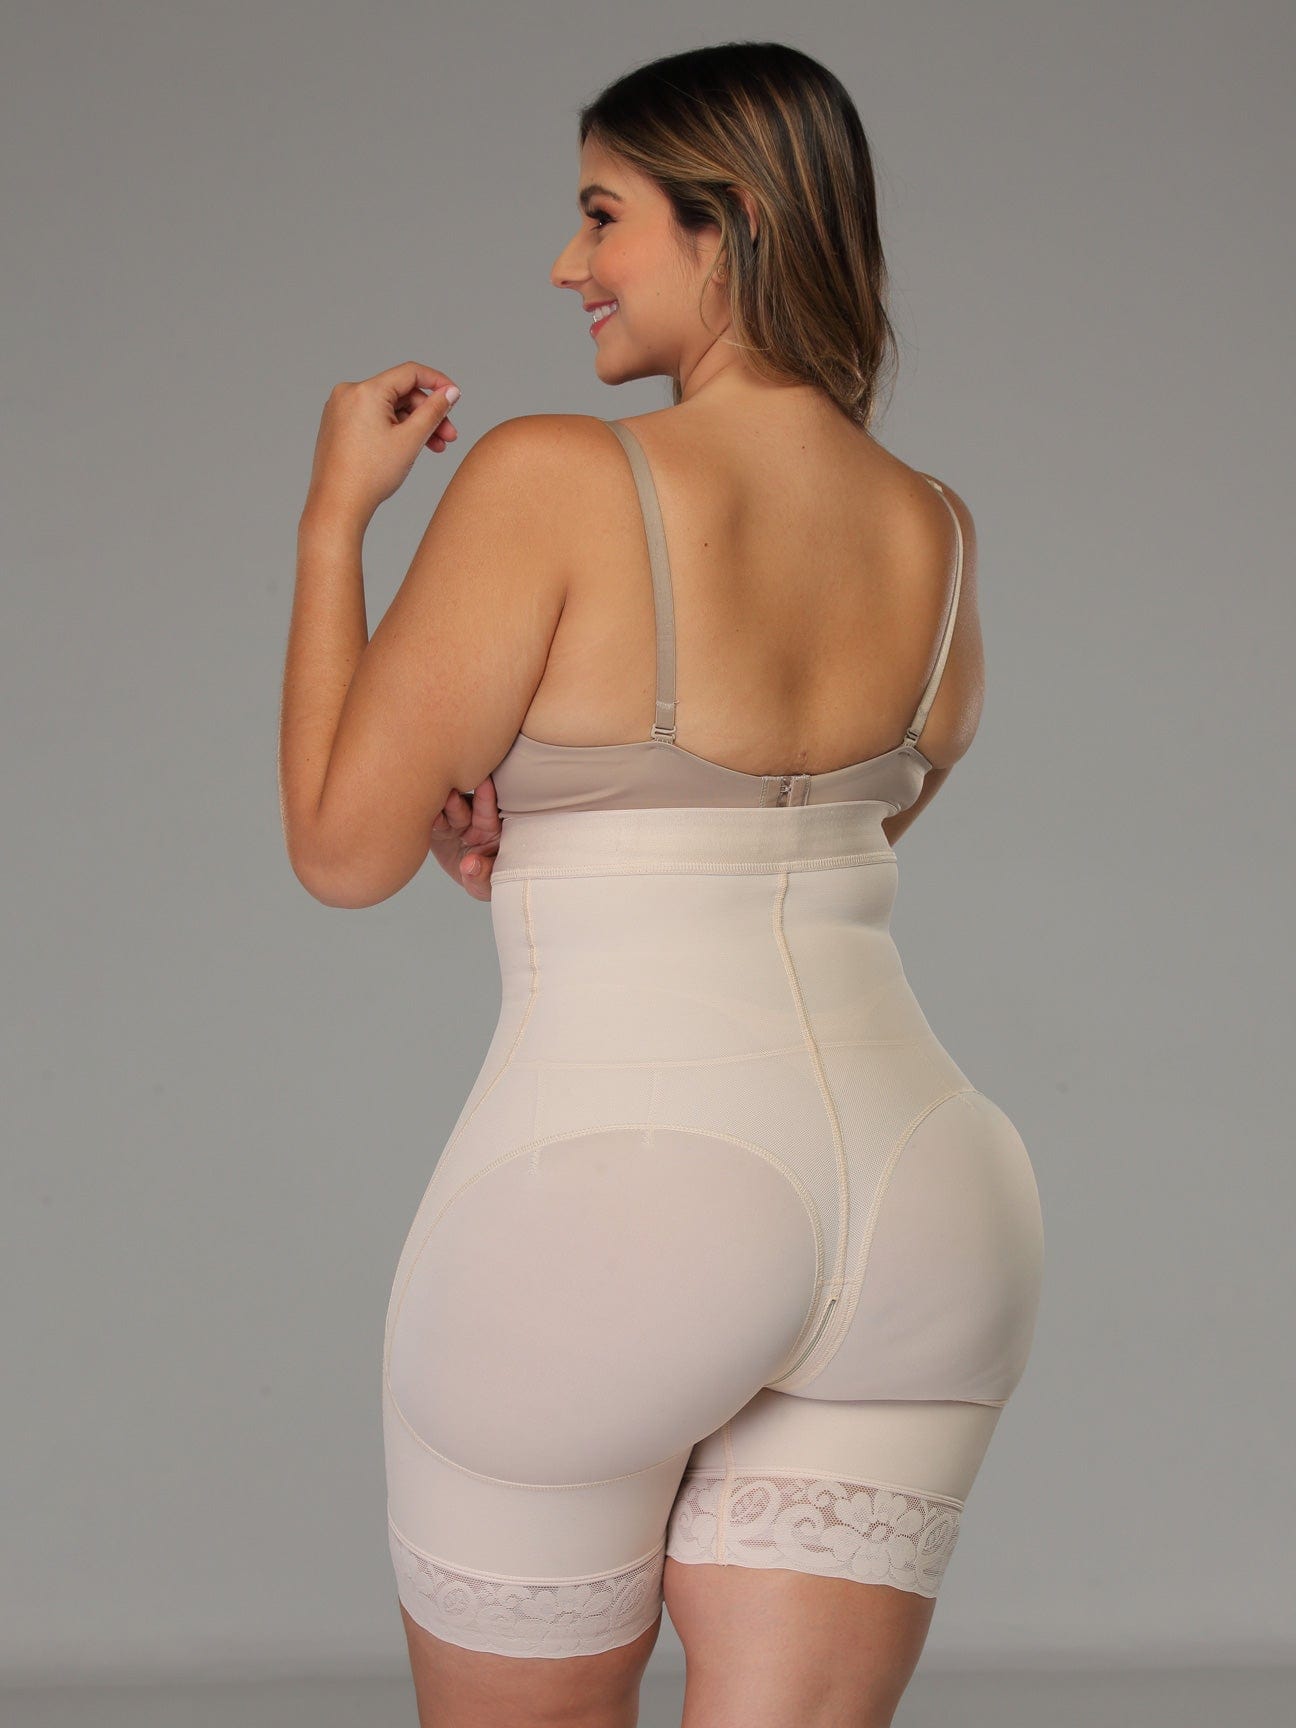  D066 Fajas Colombianas Post Surgery And Postpartum Tummy  Tuck Compression Garment For Women Beige M